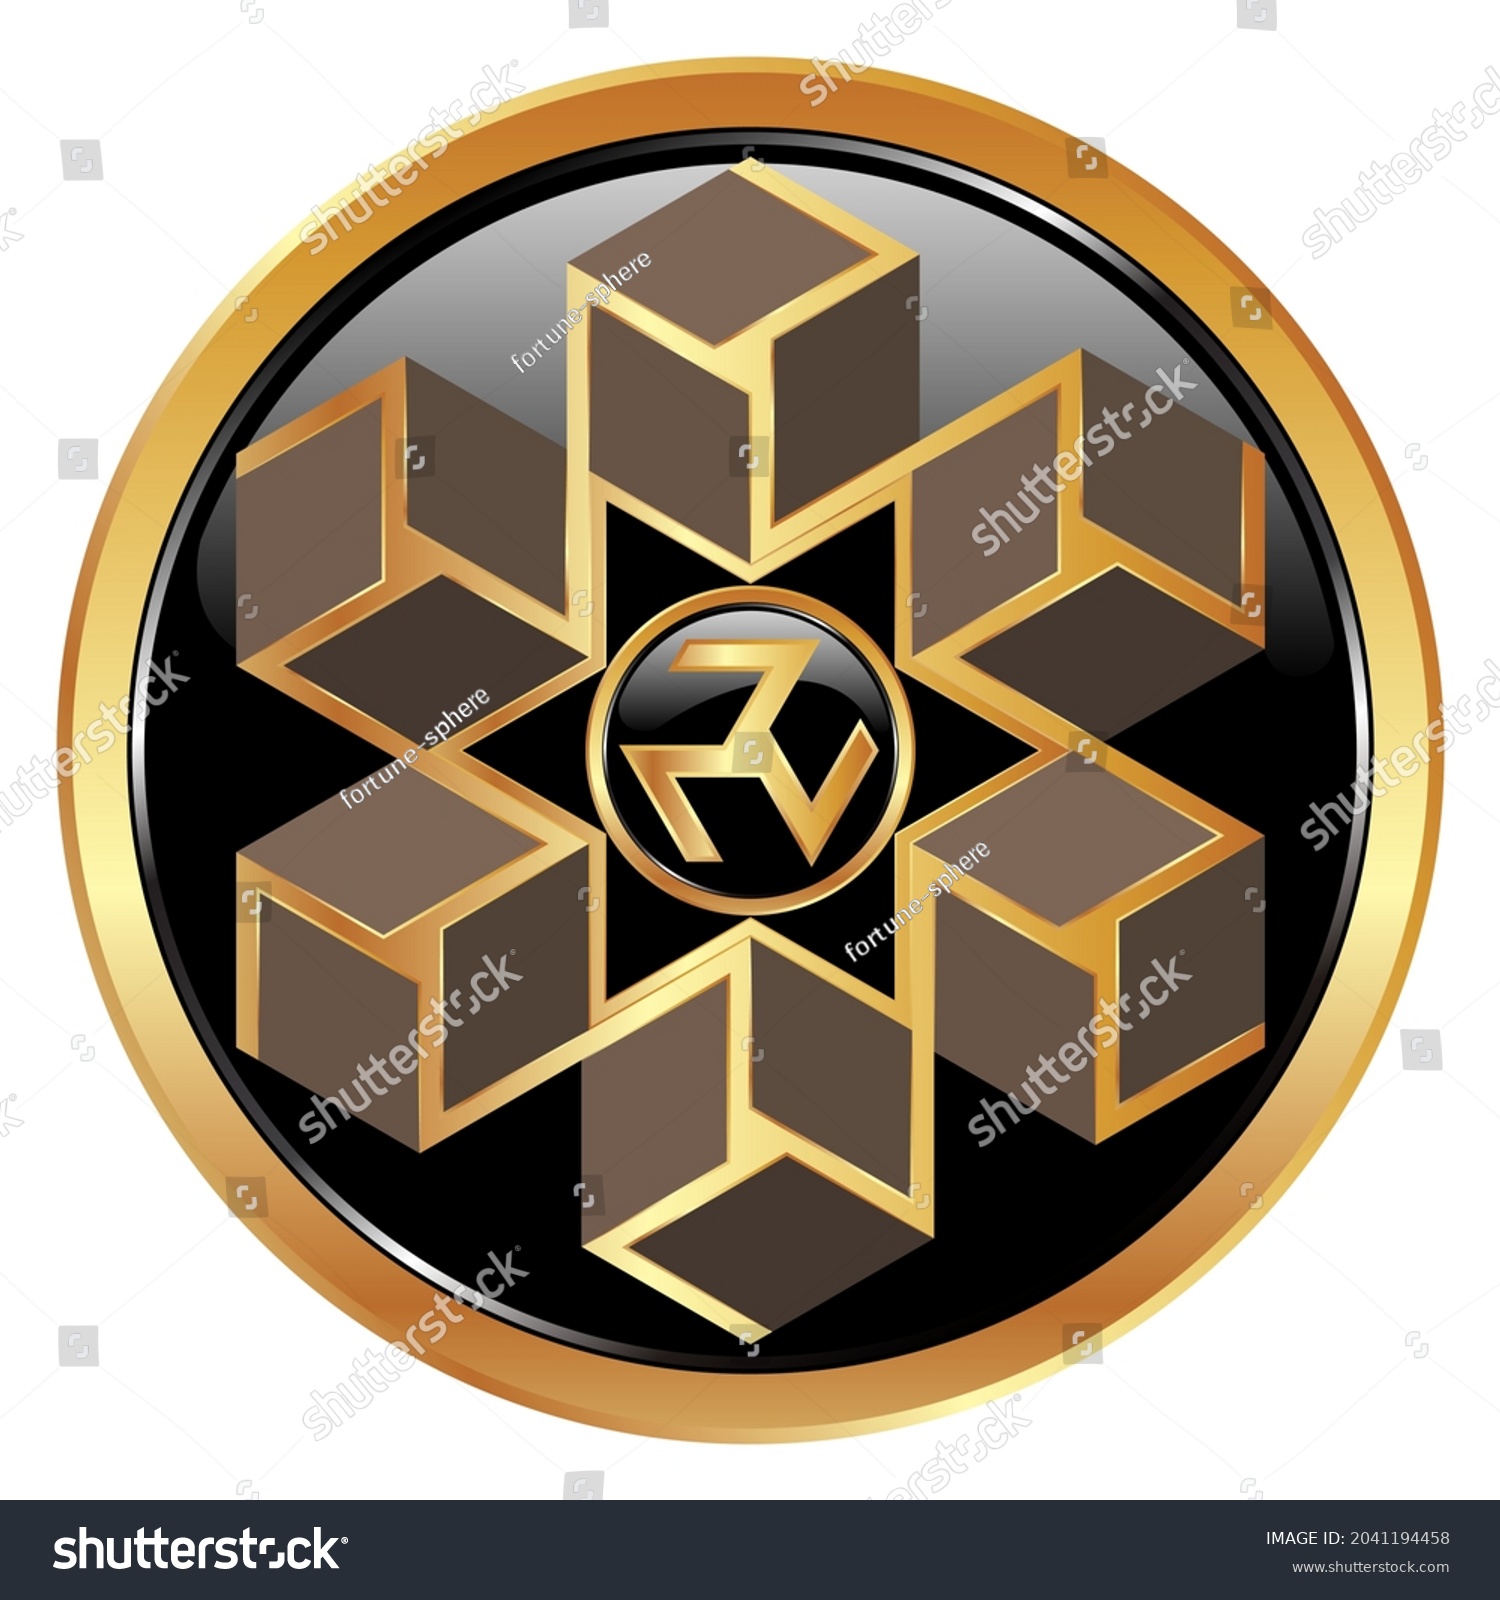 SVG of Sacred Geometry. Antahkarana  A Powerful Healing symbol used in Reiki, Hypnotherapy, Chiropractic Treatment,  Yoga and Meditation. Hexagonal Form with Three Sevens Within a Sircle. svg